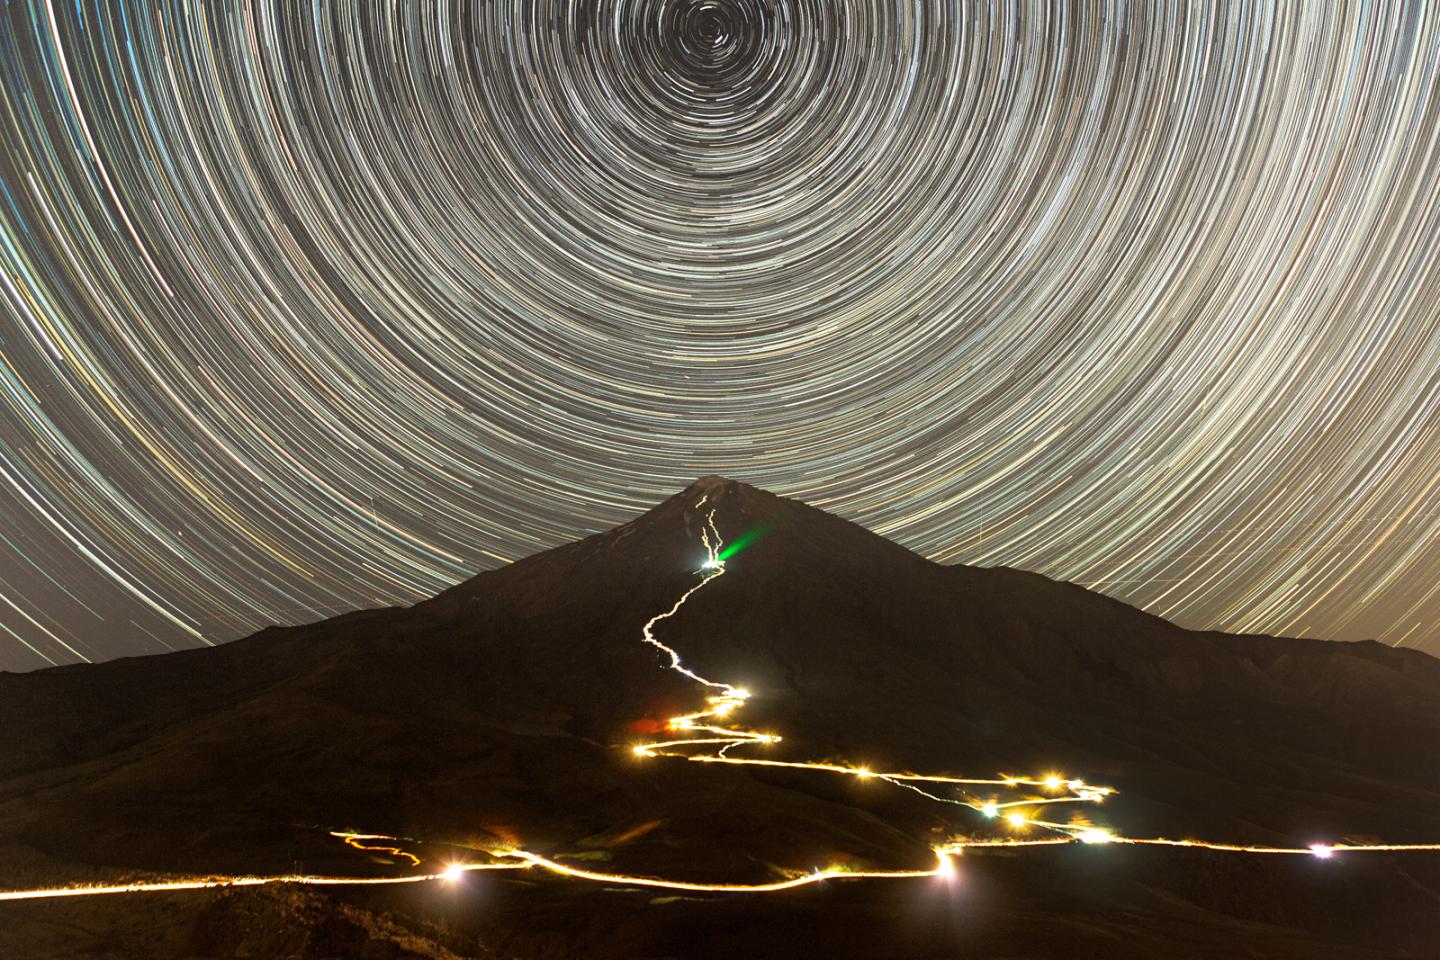 Image of a large mountain at night, with a road snaking up it illuminated in gold. In the sky is a semicircular star trail half cut off by the edges of the image in whites and yellows